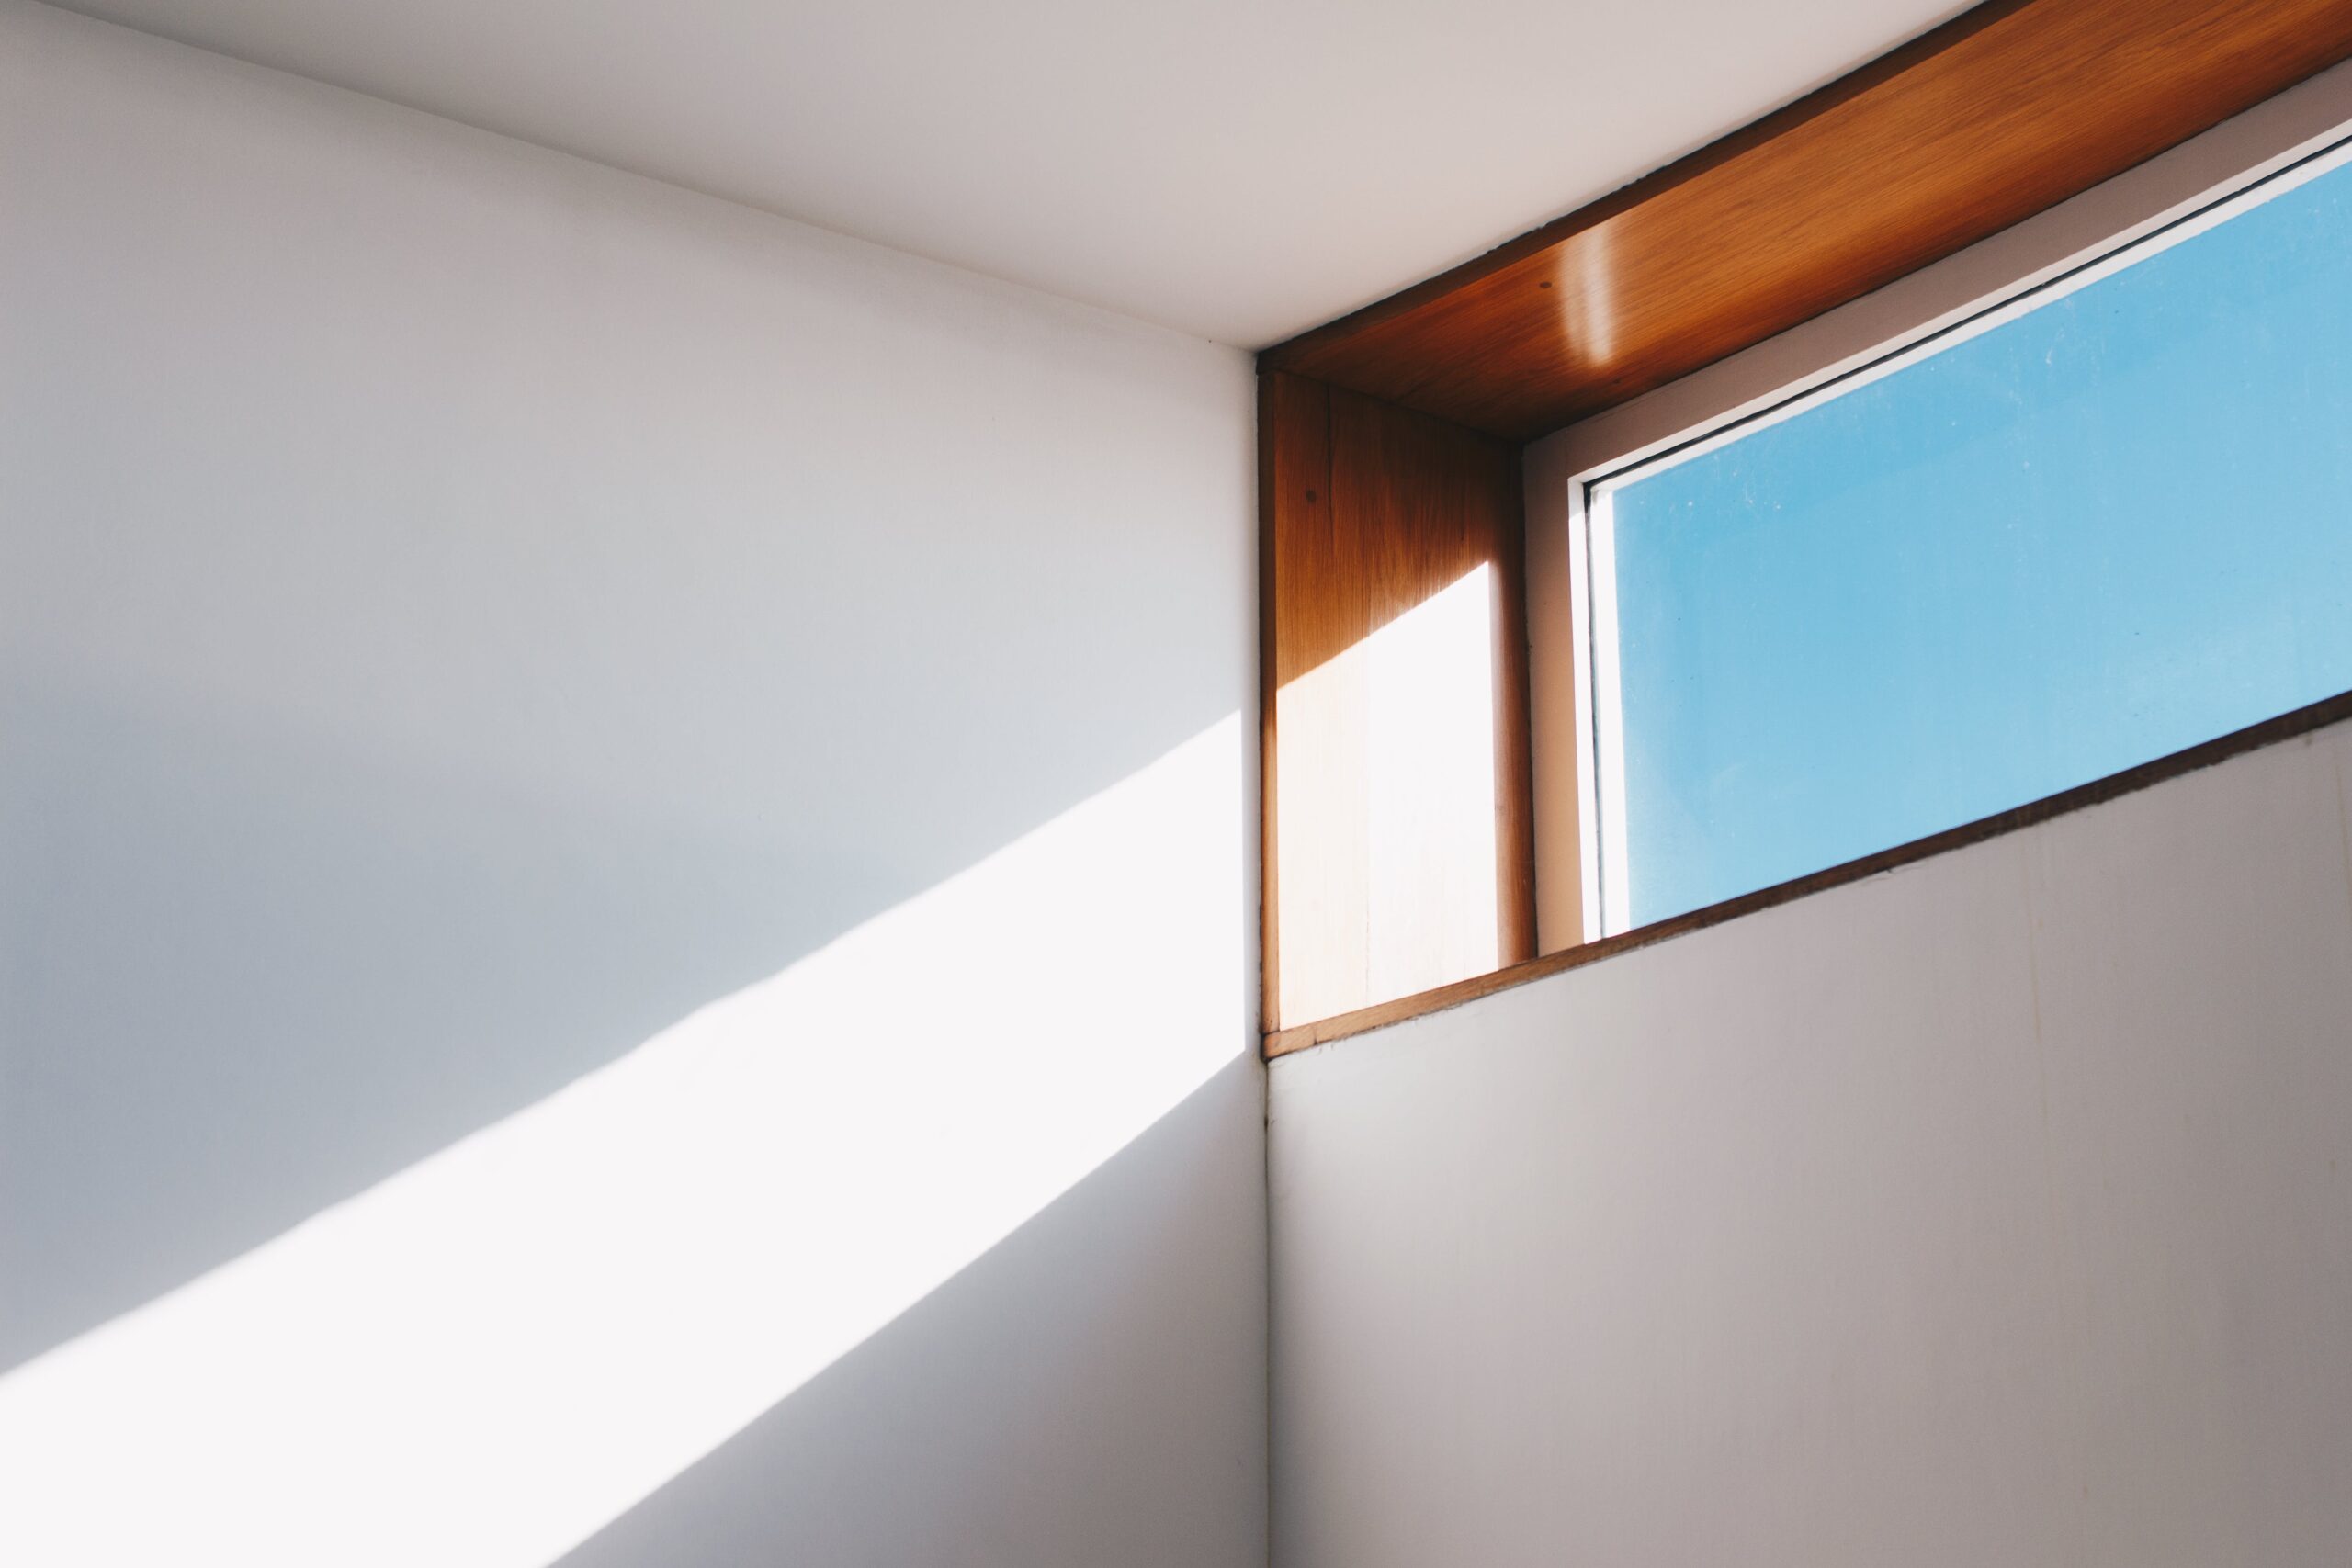 Sunlight coming through a window. Photo from Pexels.